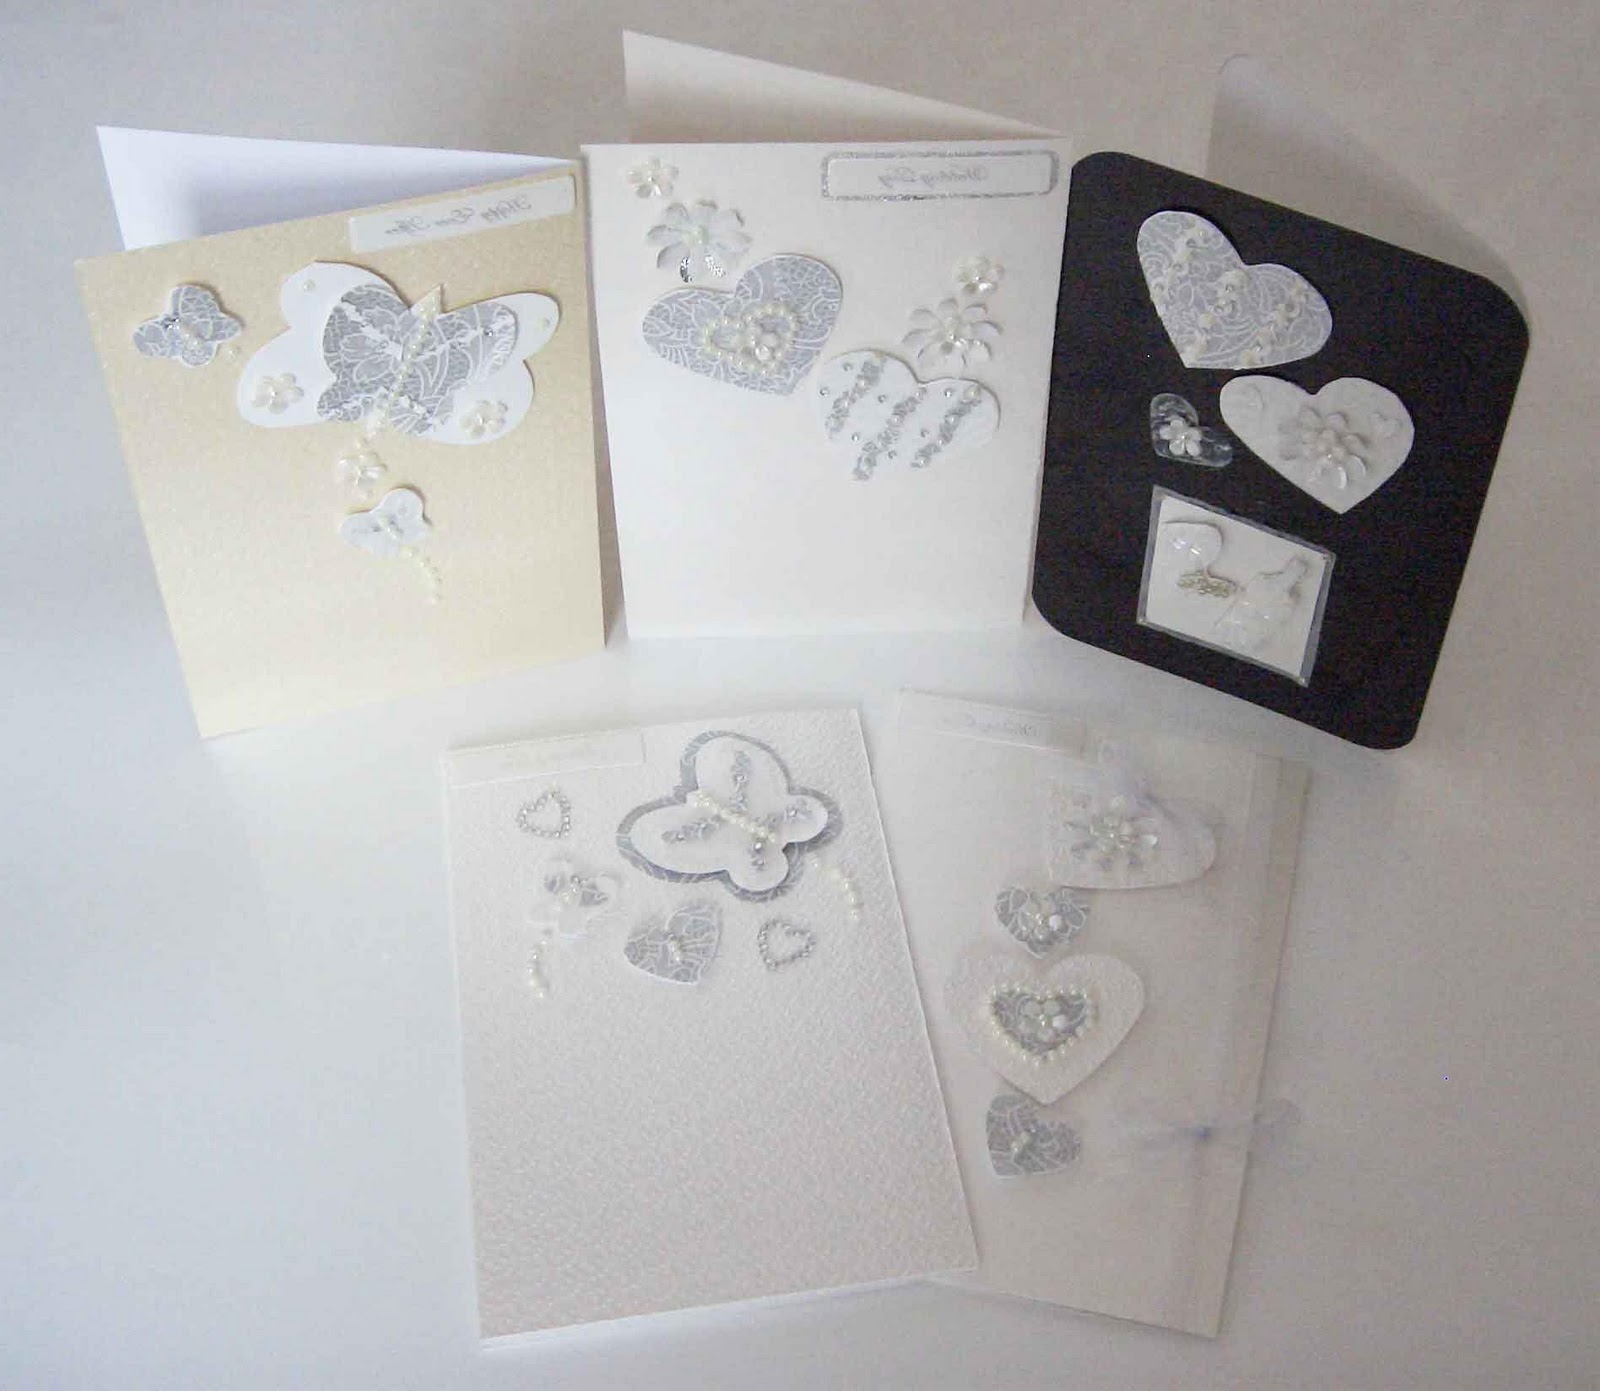 JCCreation: Greeting cards for Weddings. View original file MeLikey